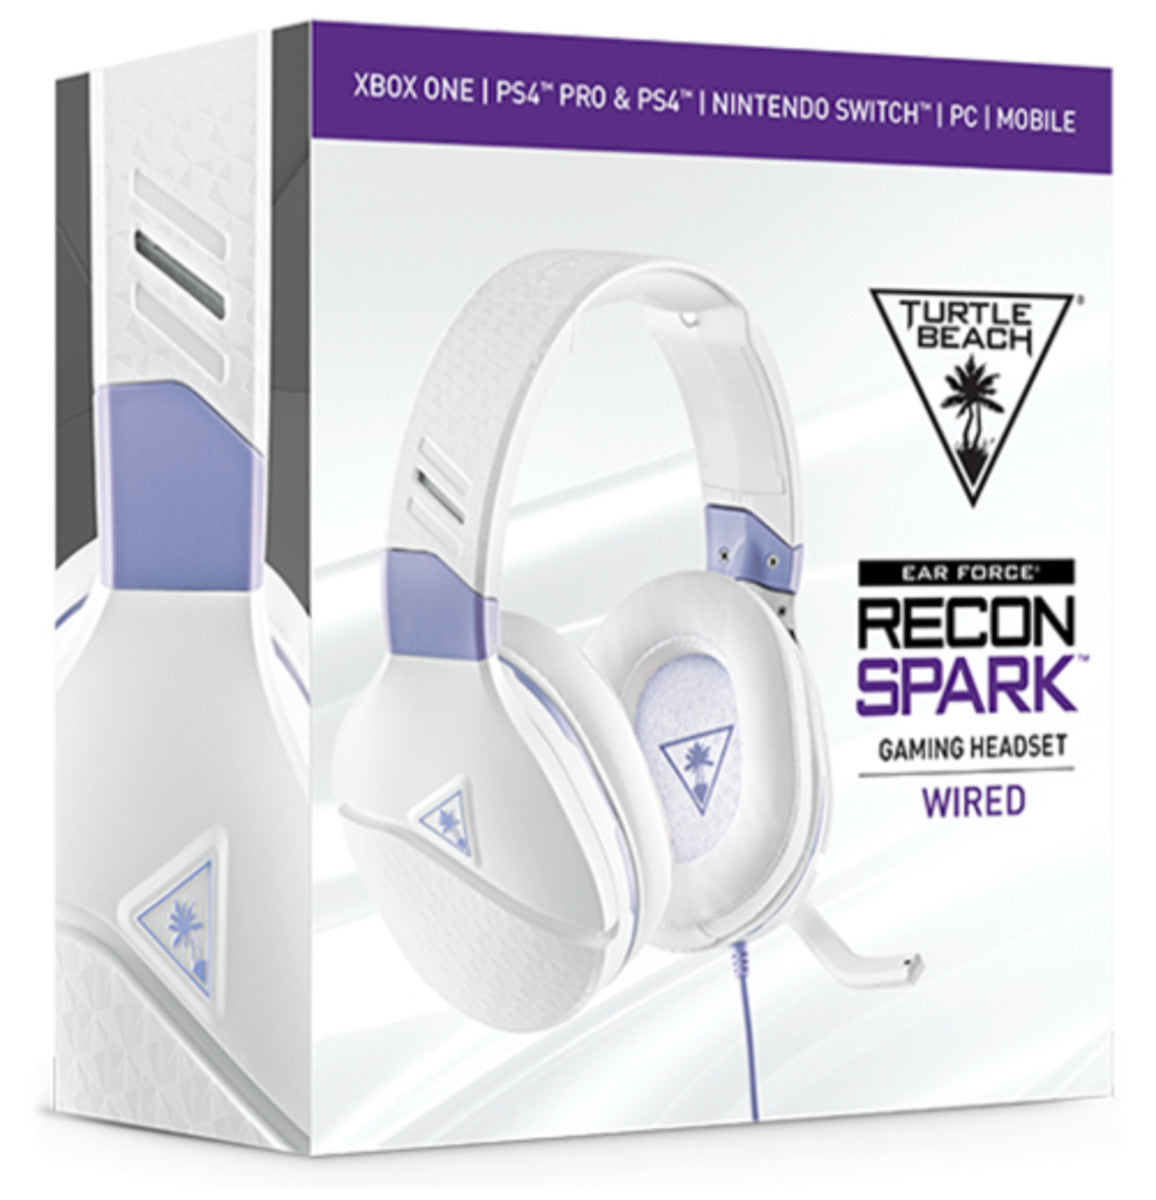 Turtle Beach Recon Spark Wired Purple, White Gaming Headset in box view